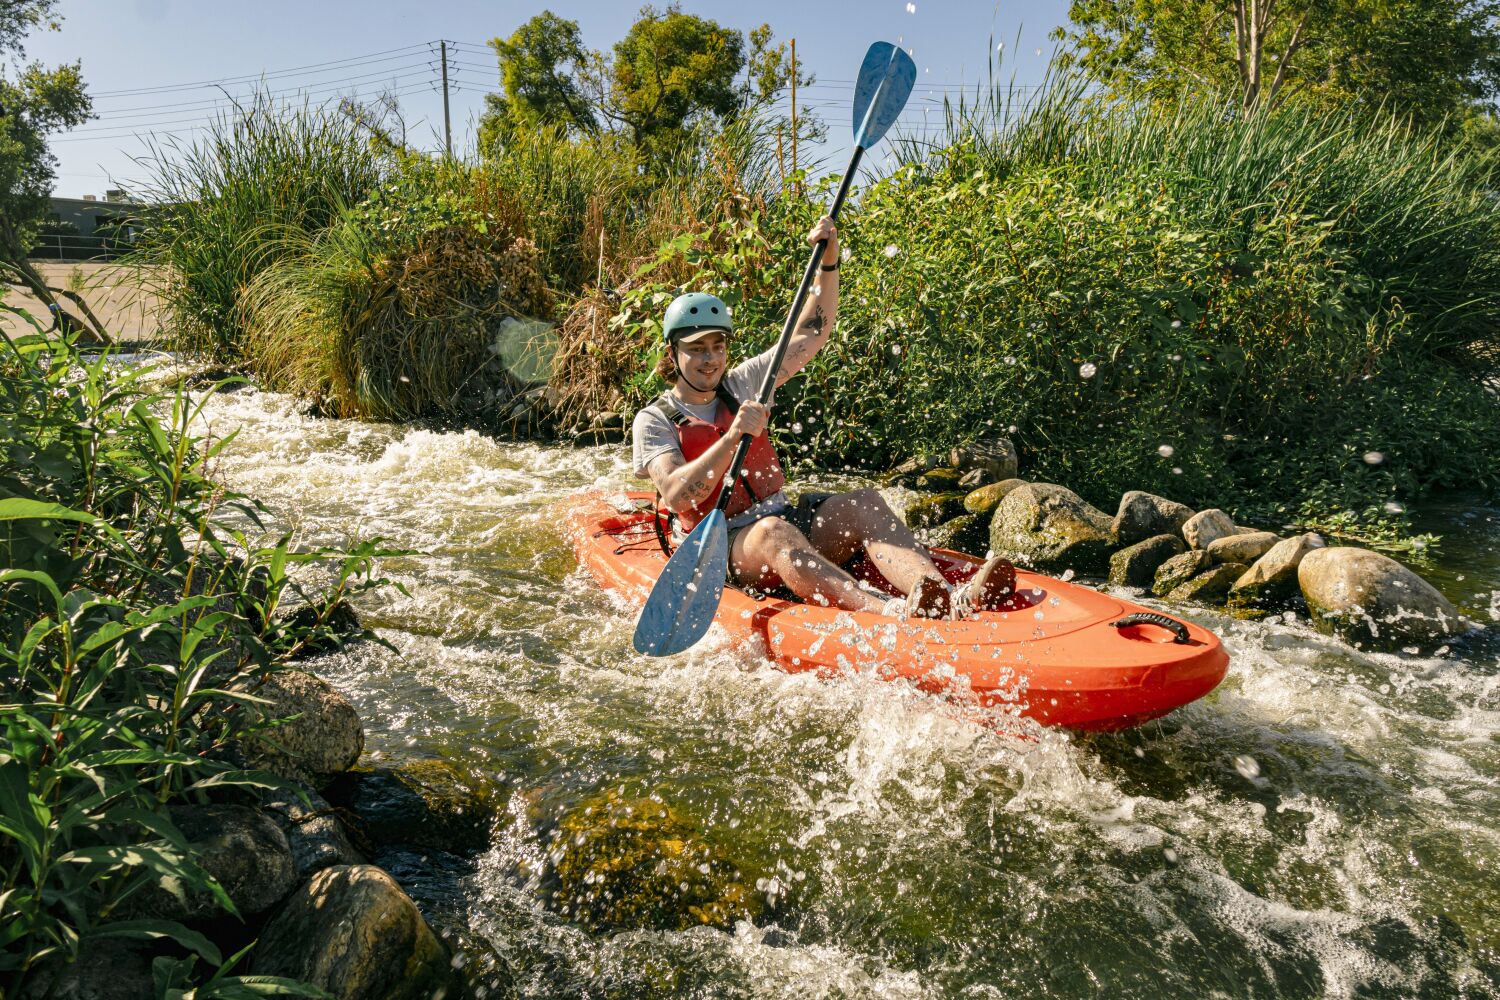 You can (and should) kayak the L.A. River. Here's how